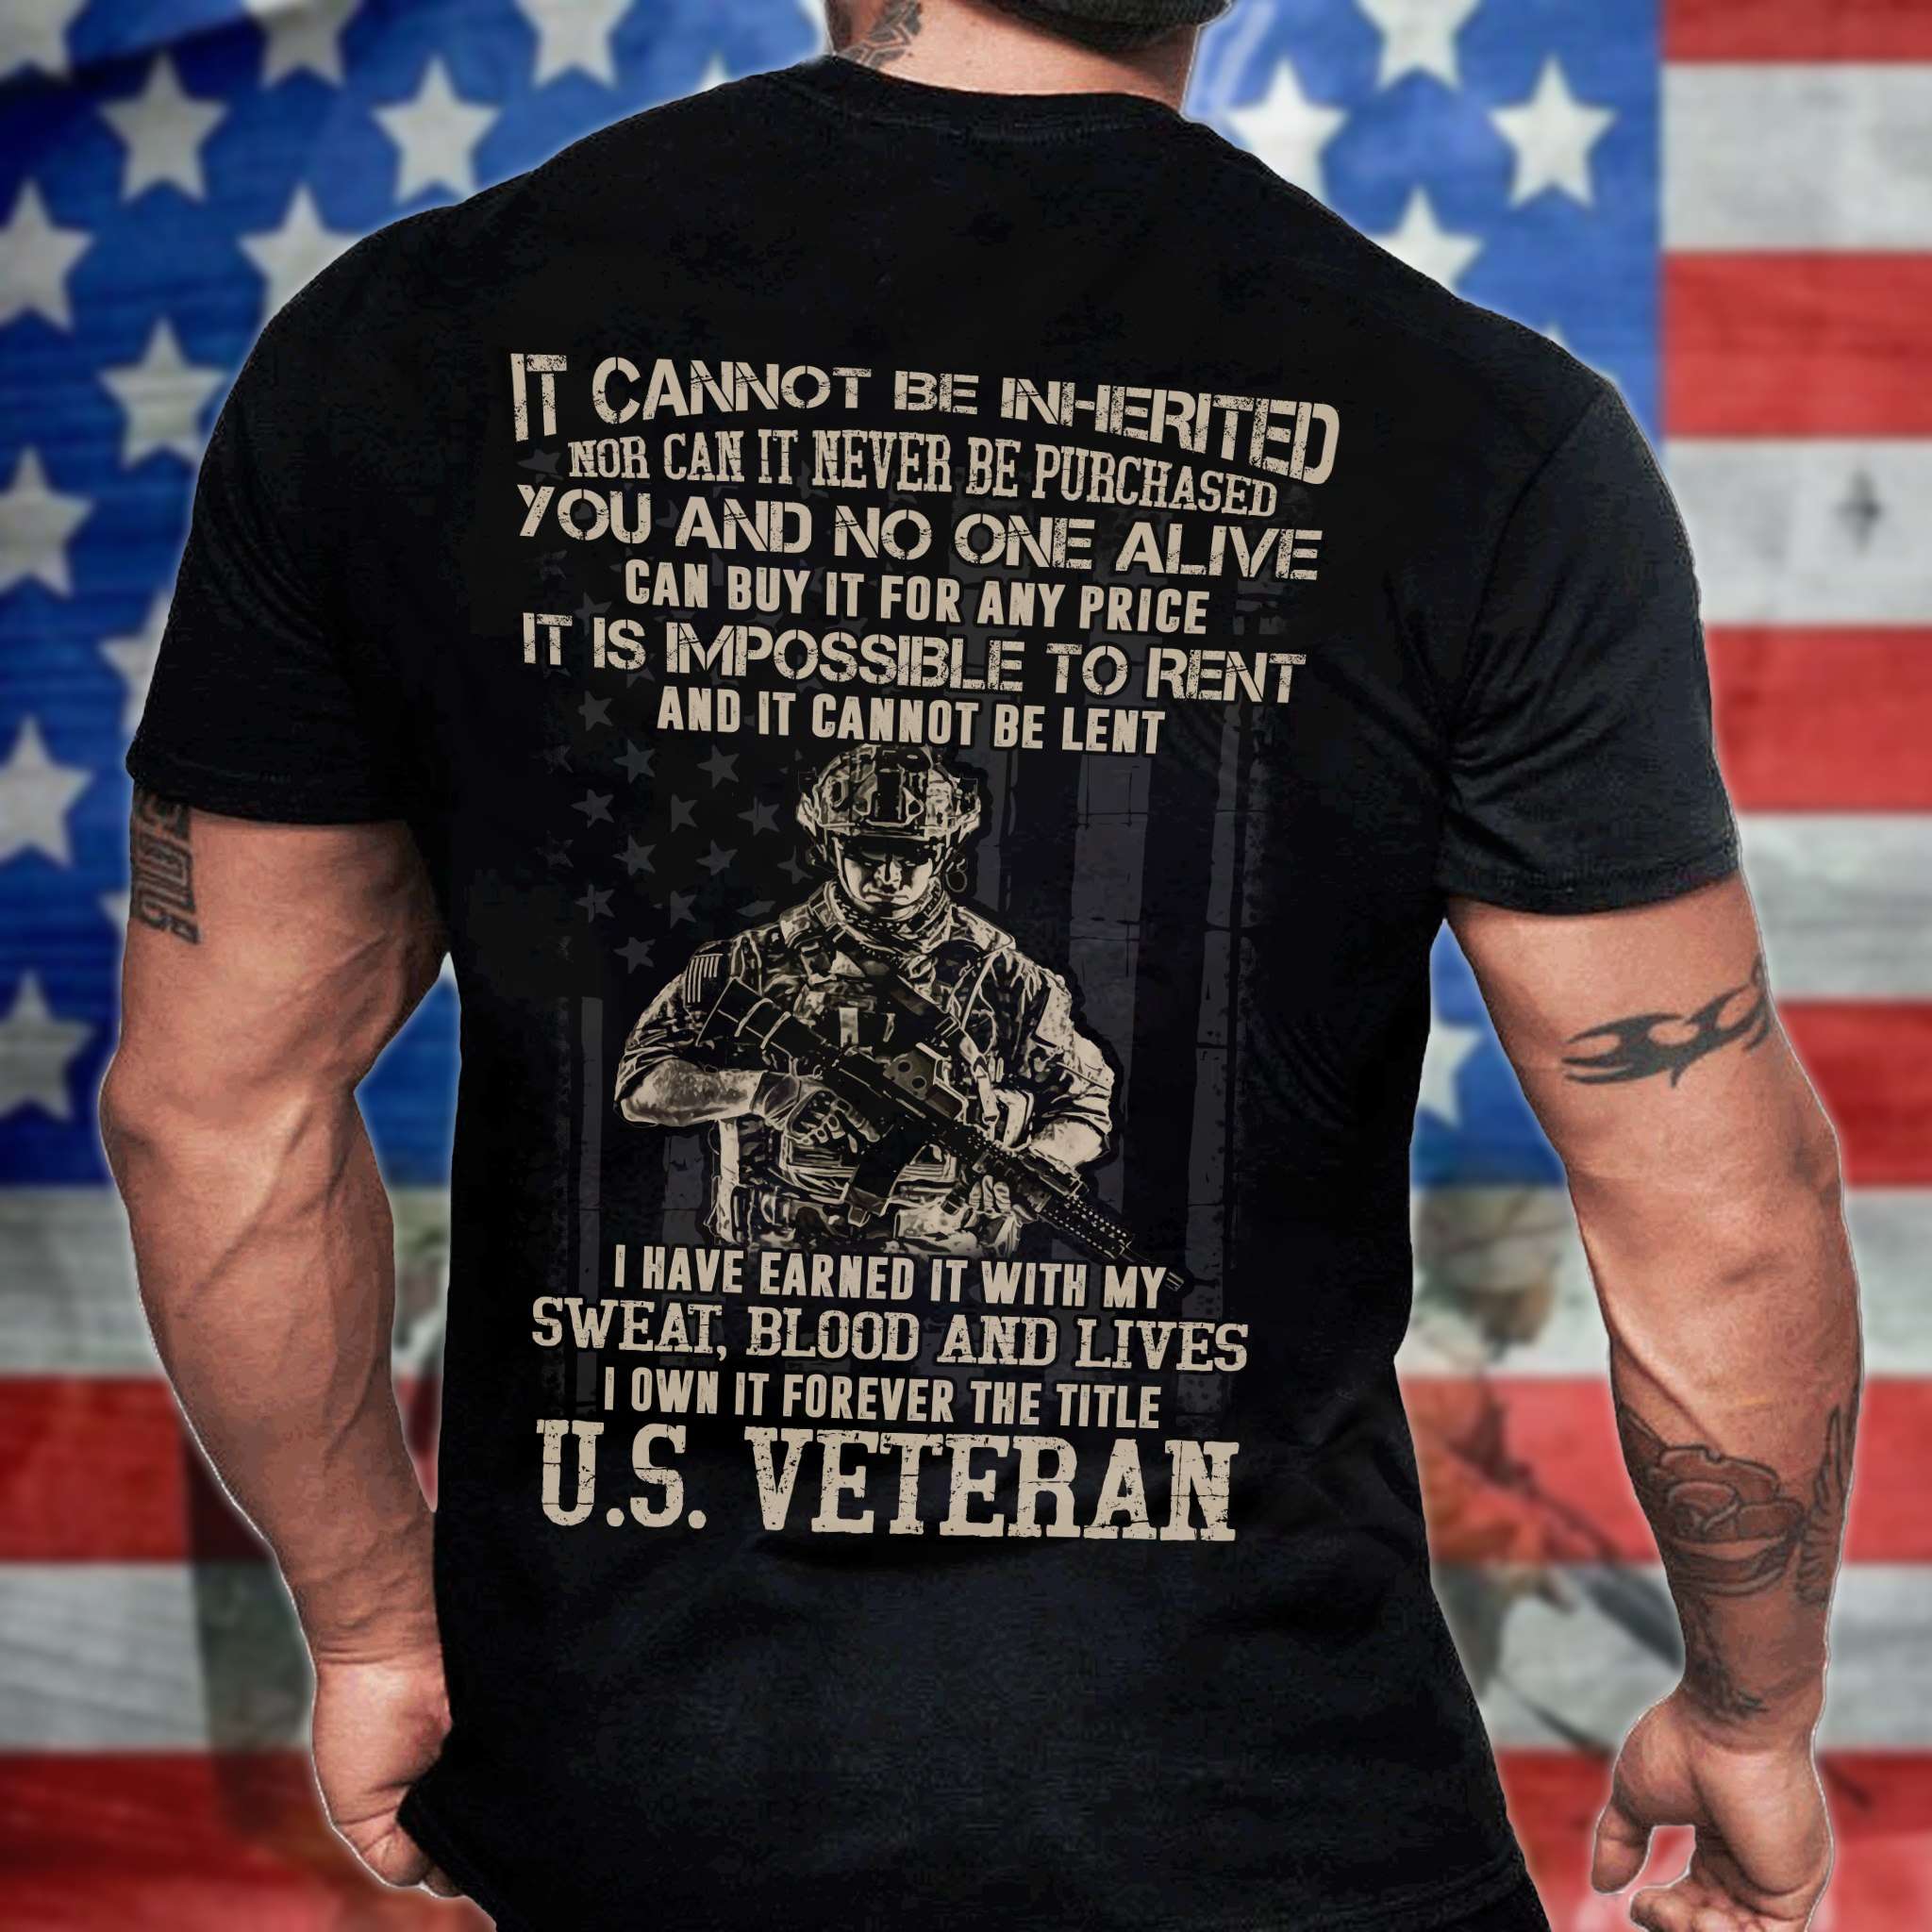 It cannot be inherited nor can it never be purchased - U.S veterans, America Army T-shirt